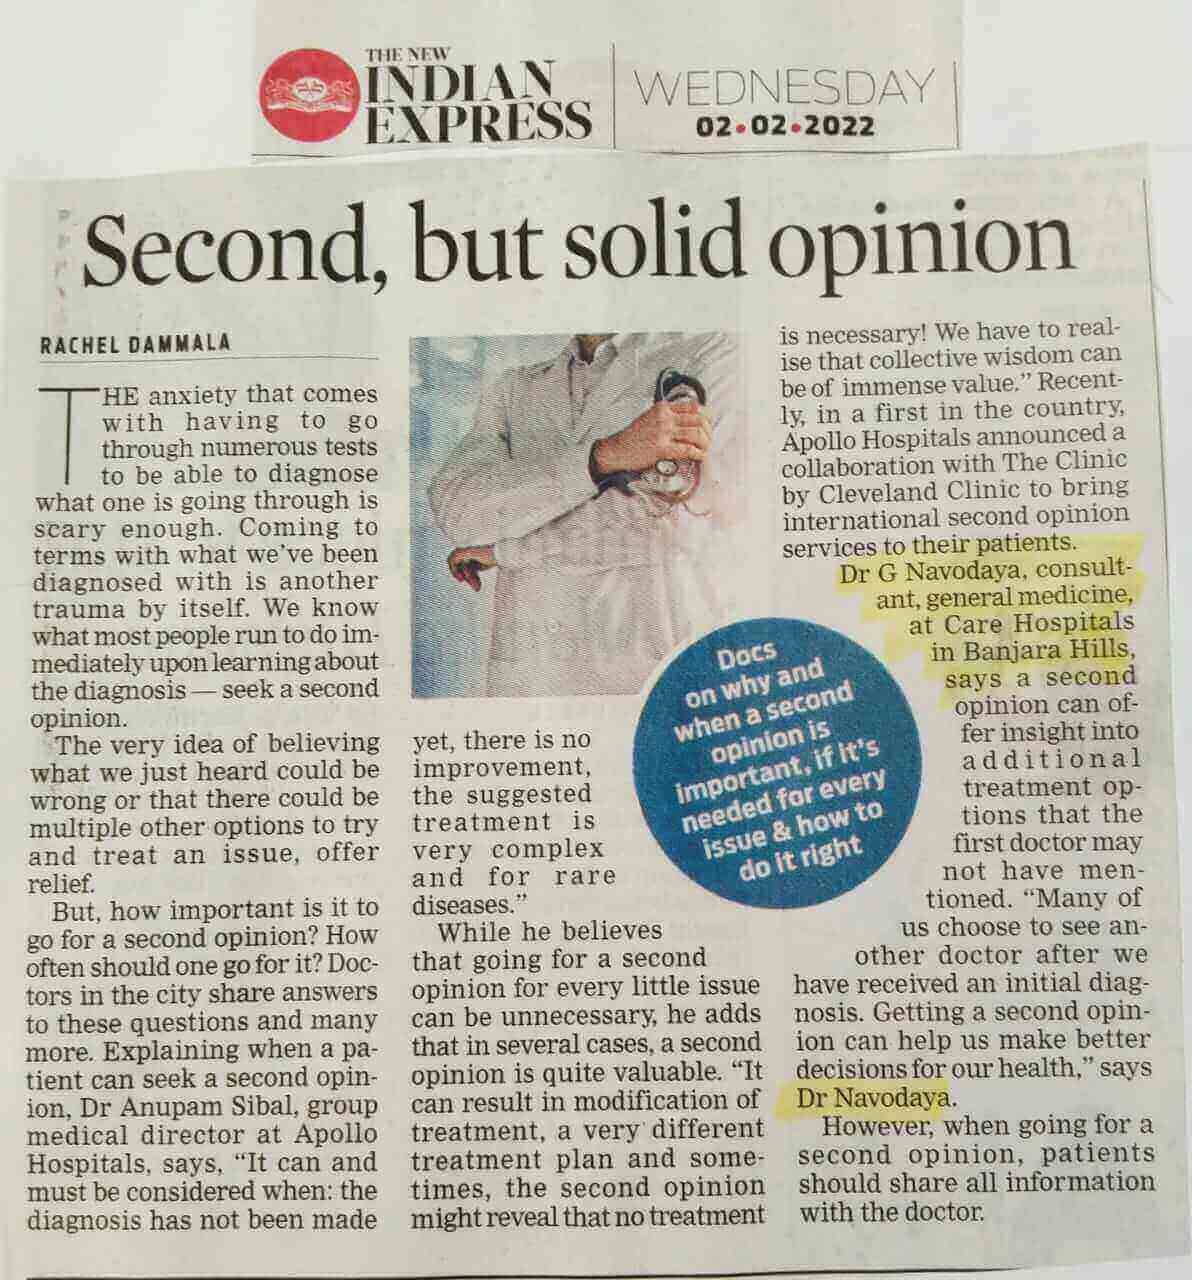 Article on Second Opinion by Dr. Navodaya Gilla - Consultant General Medicine